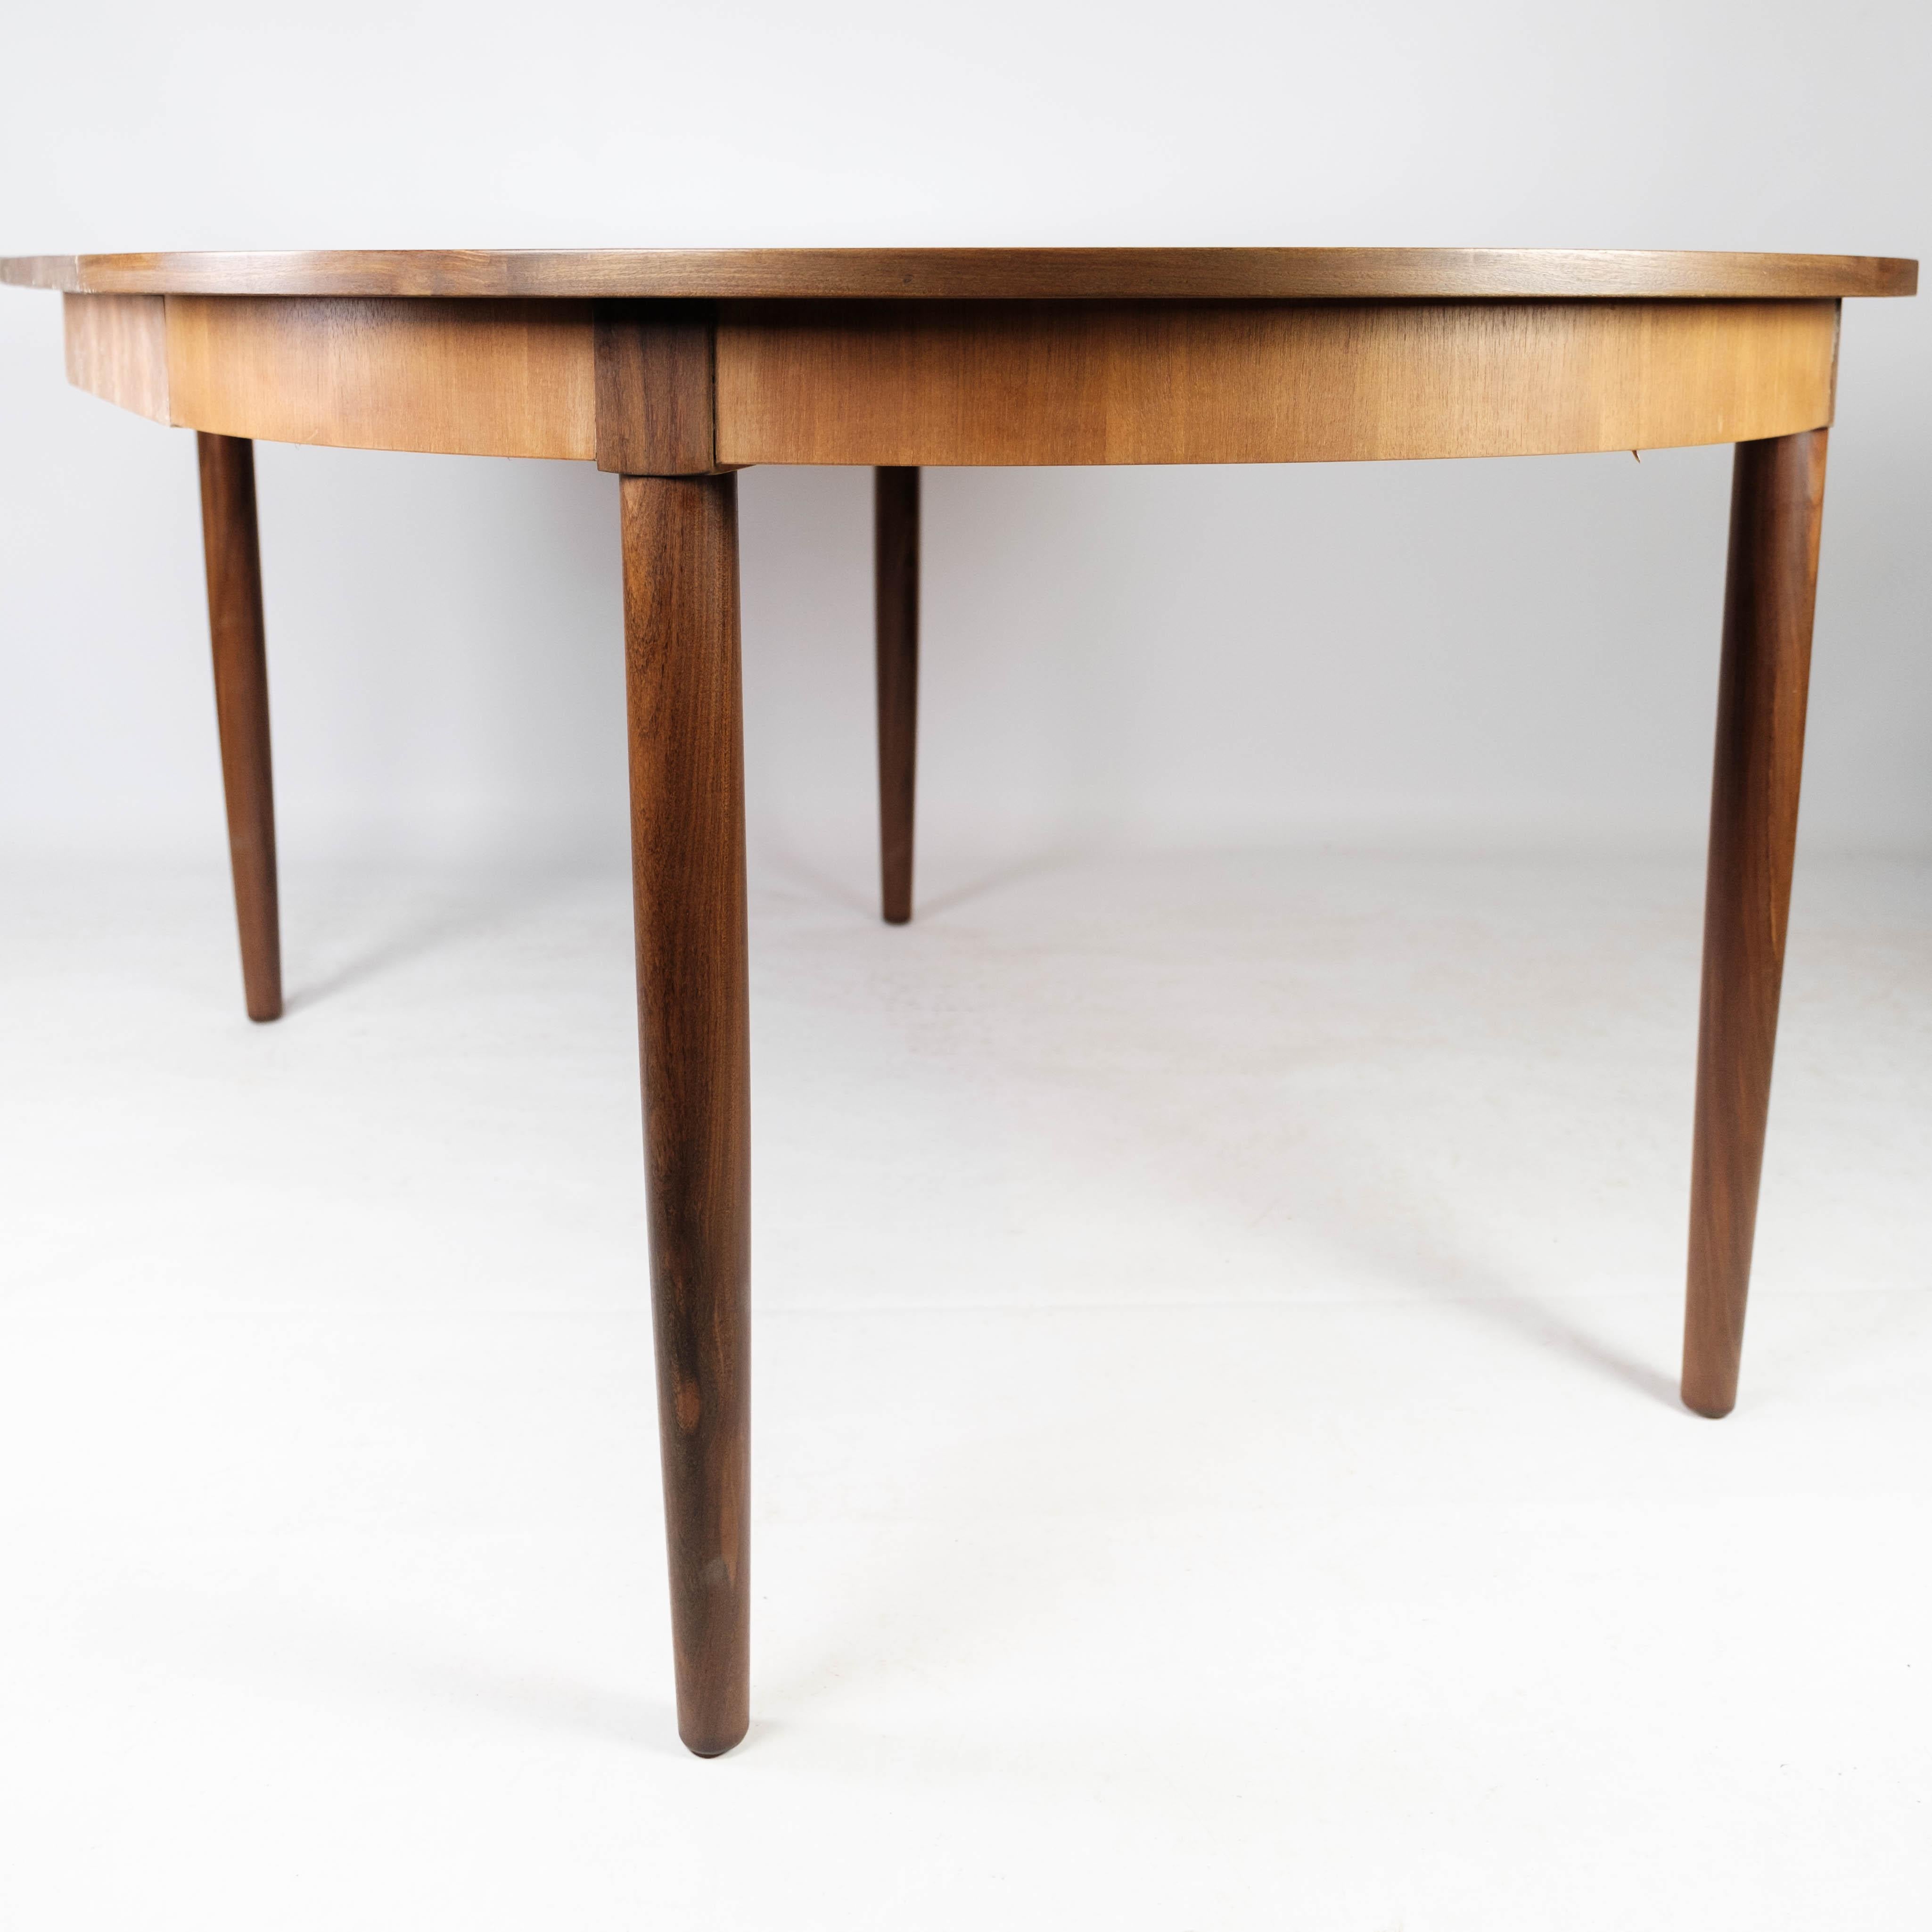 Dining Table Made In Teak With Extensions, Danish Design From 1960s For Sale 13